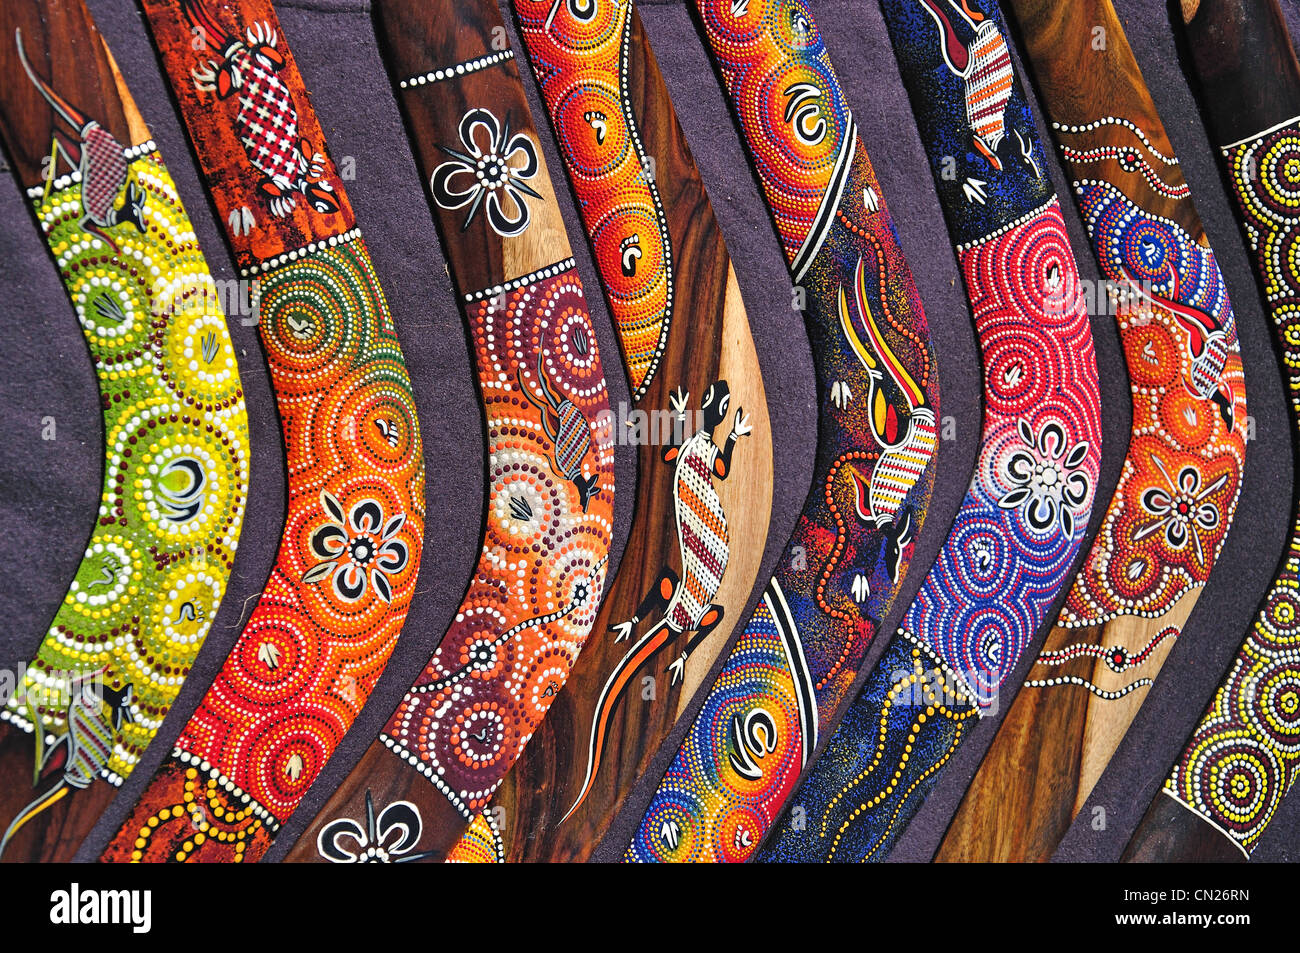 Colourful boomerangs in souvenir store, Central Business District, Sydney, New South Wales, Australia Stock Photo